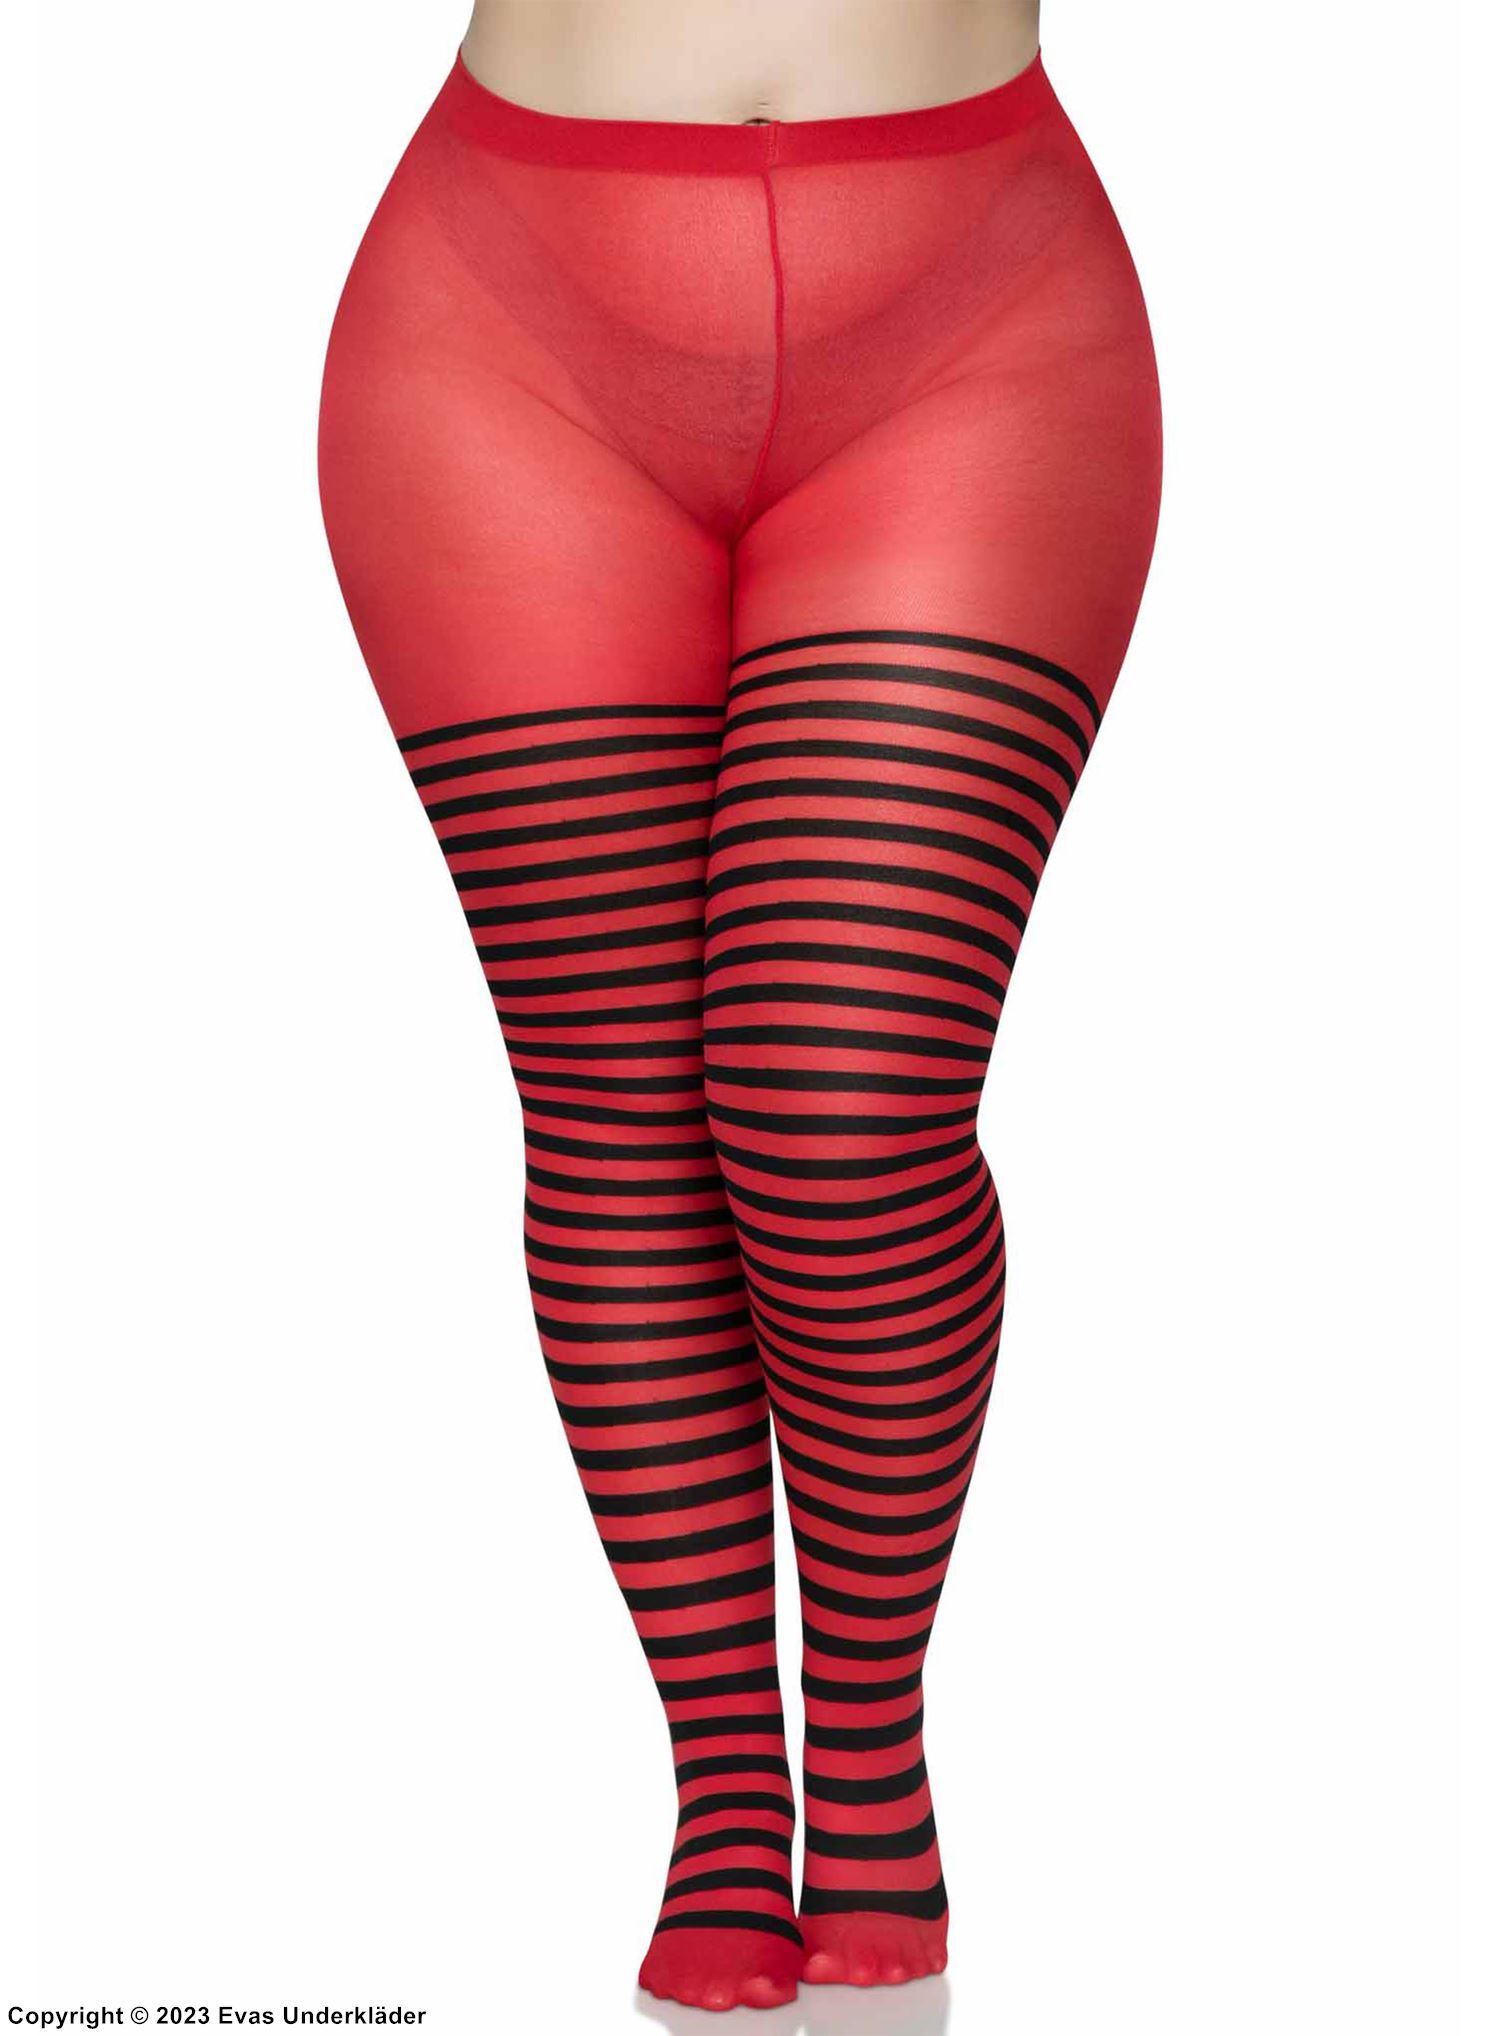 Tights, colorful stripes, XL to 4XL